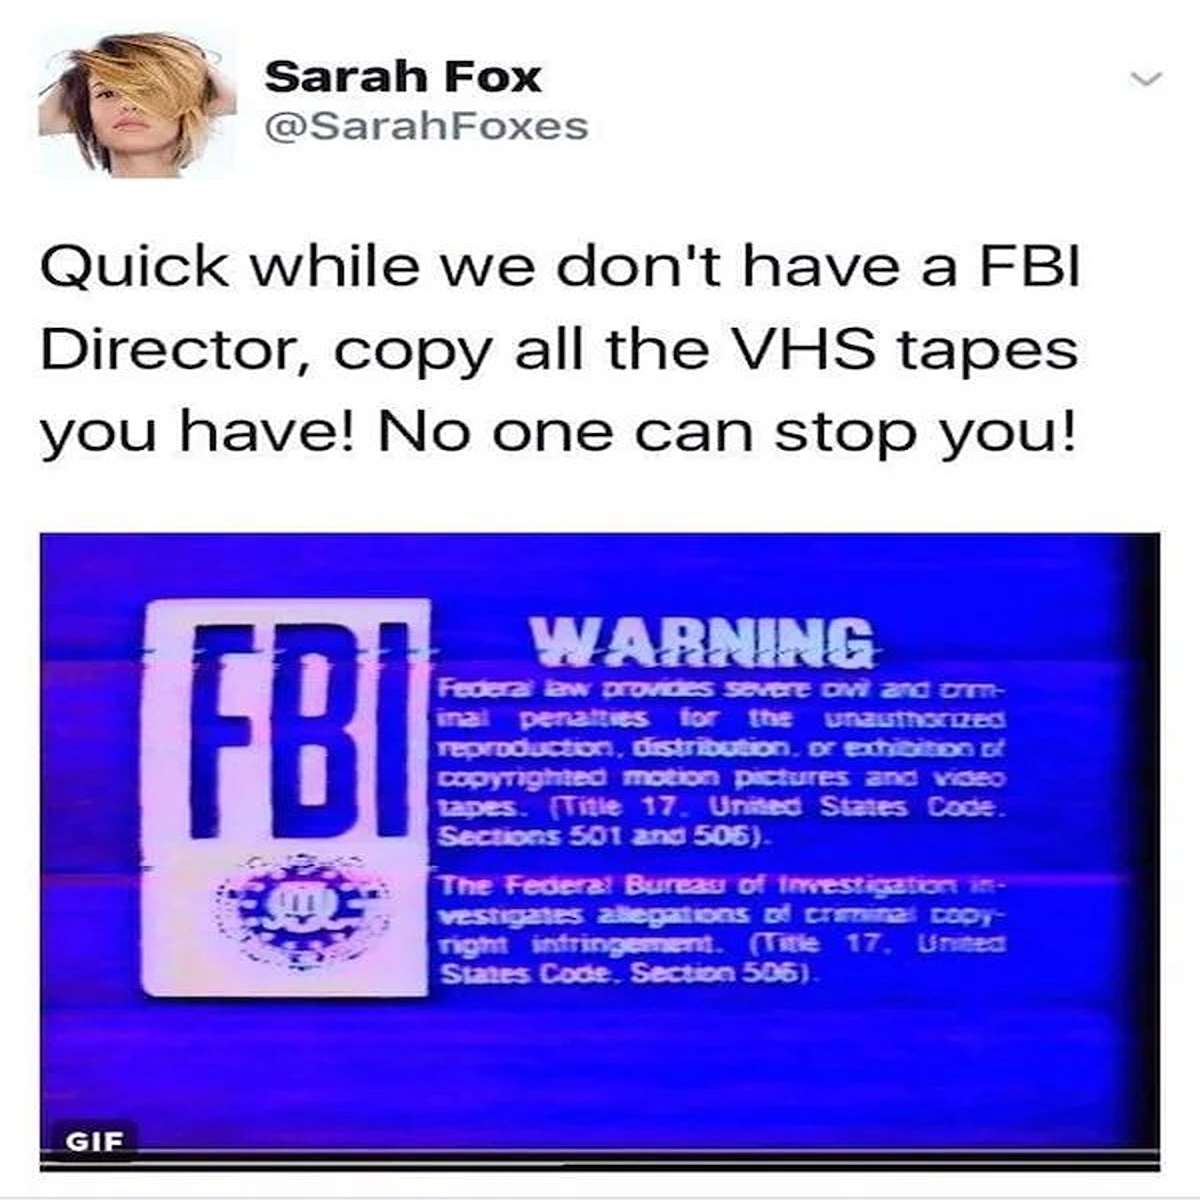 dank memes - media - Sarah Fox Foxes Quick while we don't have a Fbi Director, copy all the Vhs tapes you have! No one can stop you! Gif Fbi Warning Federal law provides severe ovi and crm unauthorized inal penalties for the reproduction, distribution, or